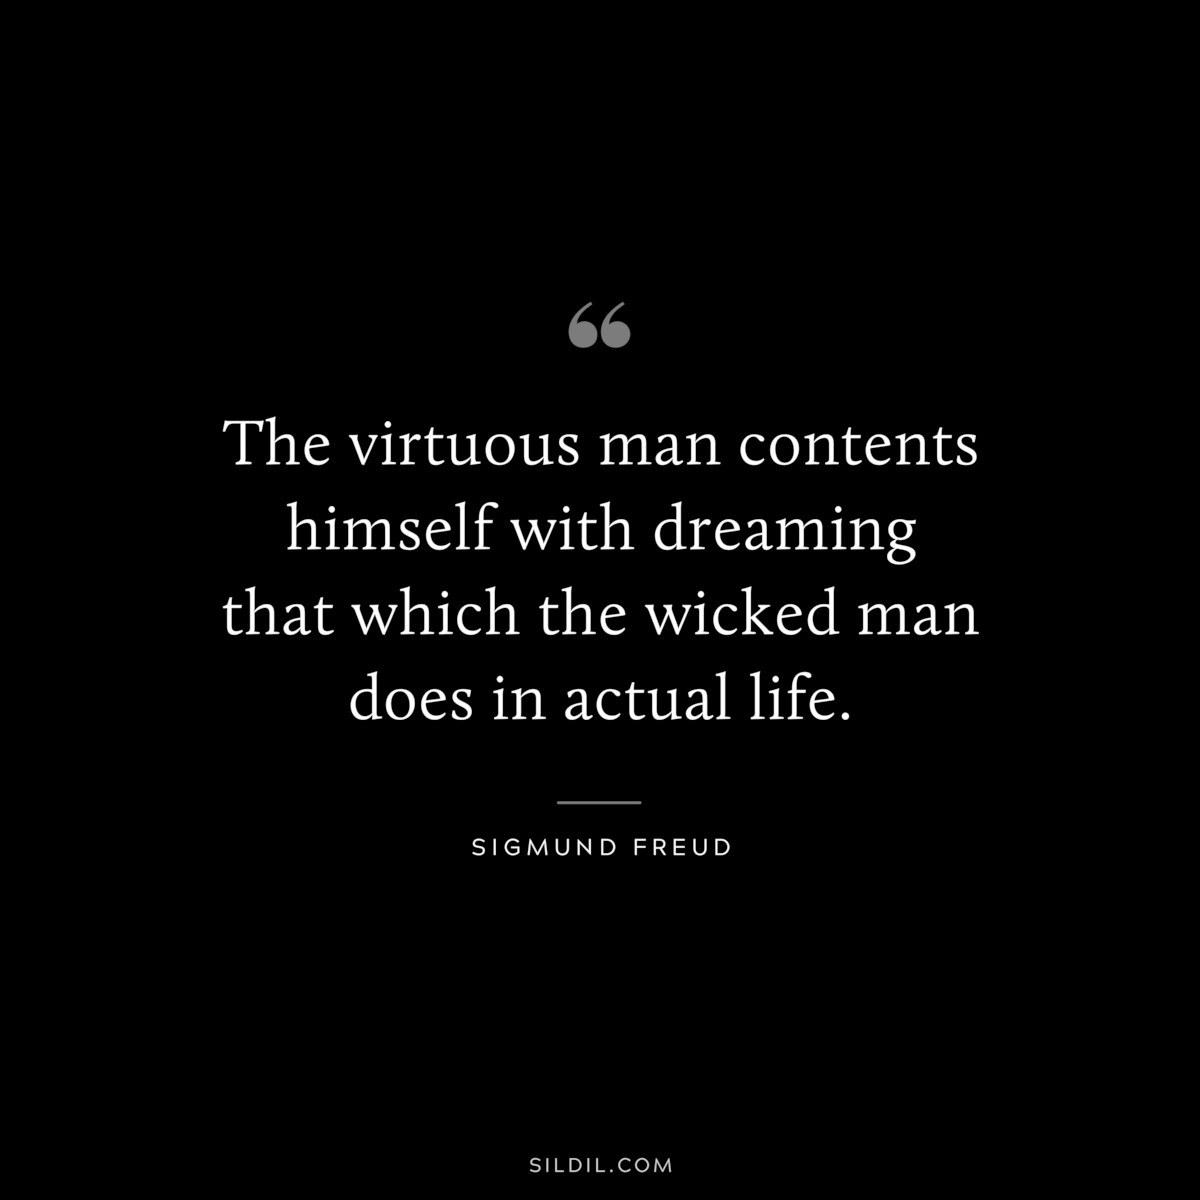 The virtuous man contents himself with dreaming that which the wicked man does in actual life. ― Sigmund Frued